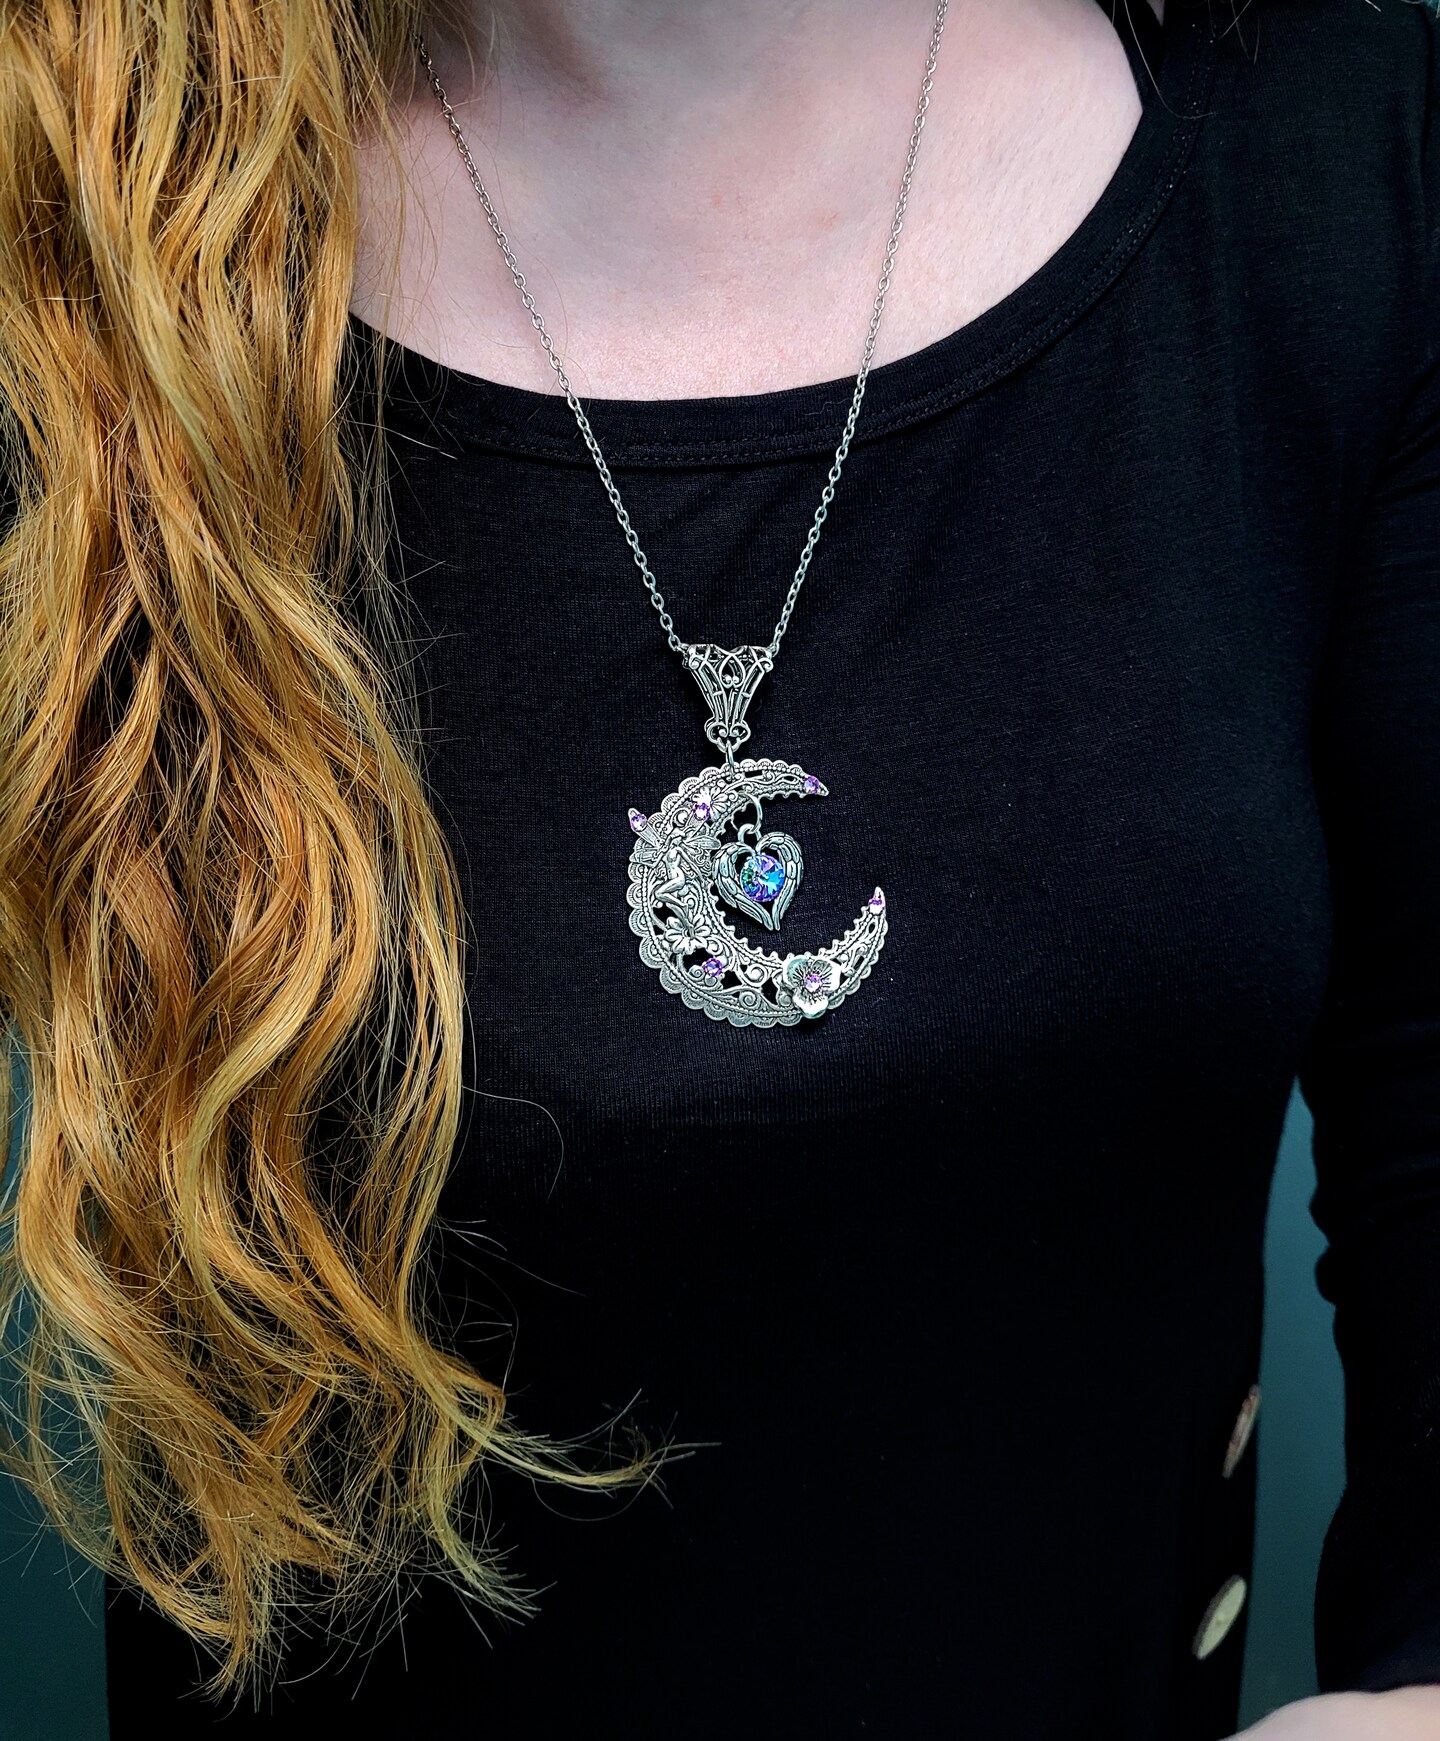 Buy Crystal Moon Necklace, Half Moon Necklace, Crescent Moon Jewelry, Moon  Gift Womens Celestial Jewelry Moon Charm Witchy Jewelry Swarovski Online in  India - Etsy